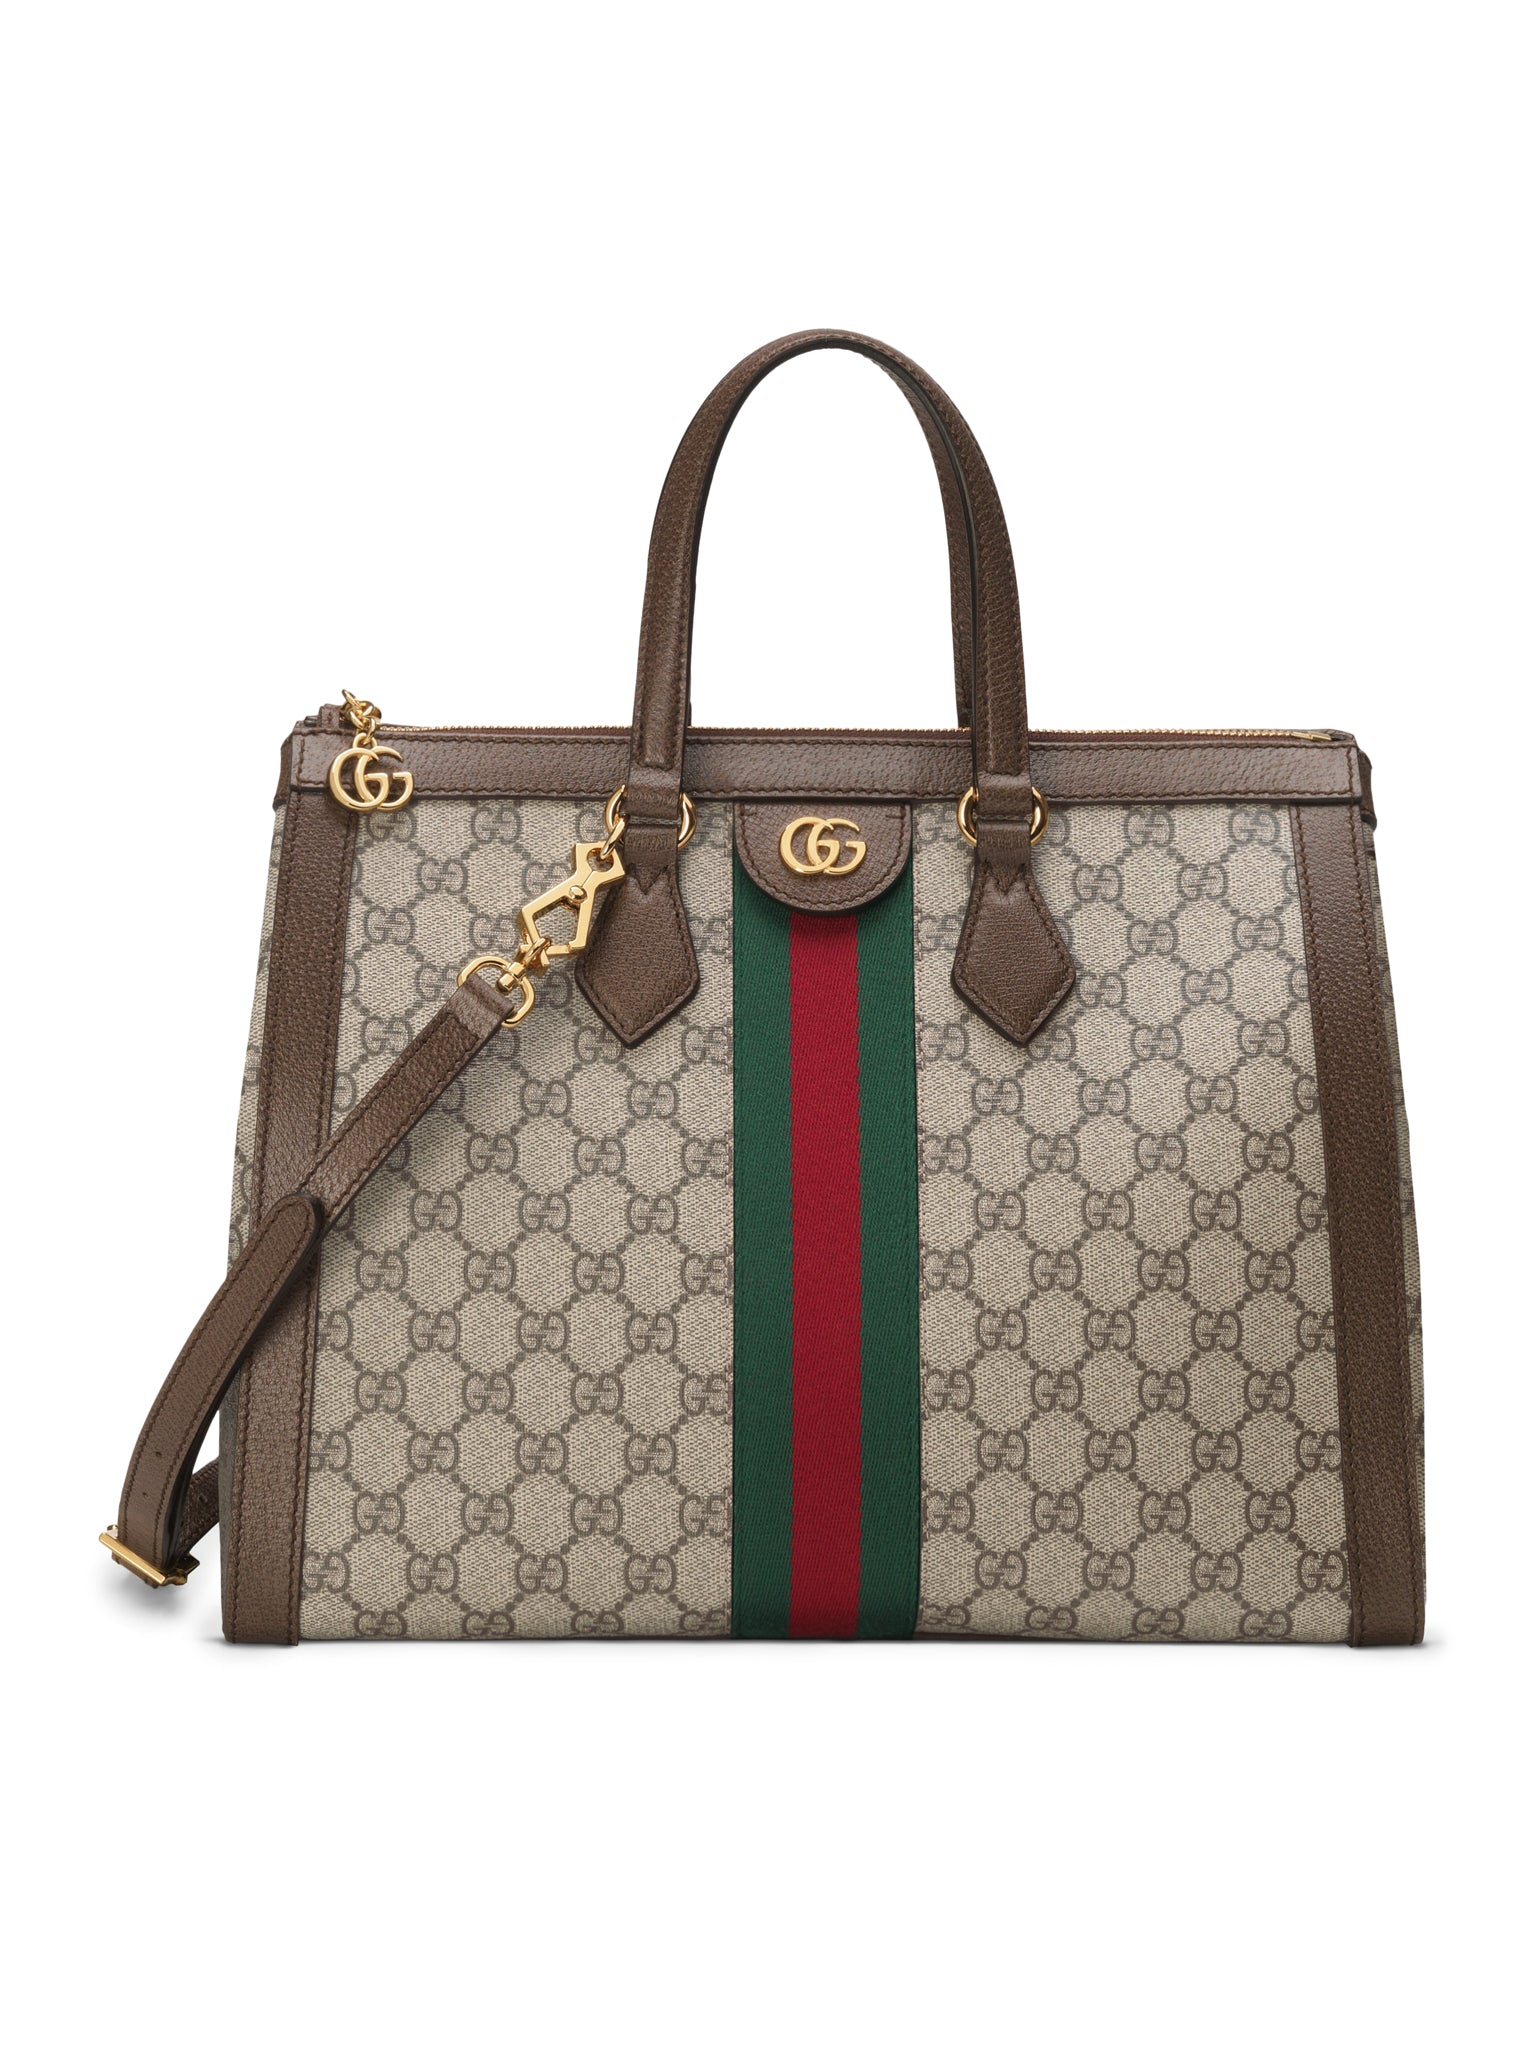 Gucci Ophidia Gg Medium Tote Bag In Brown